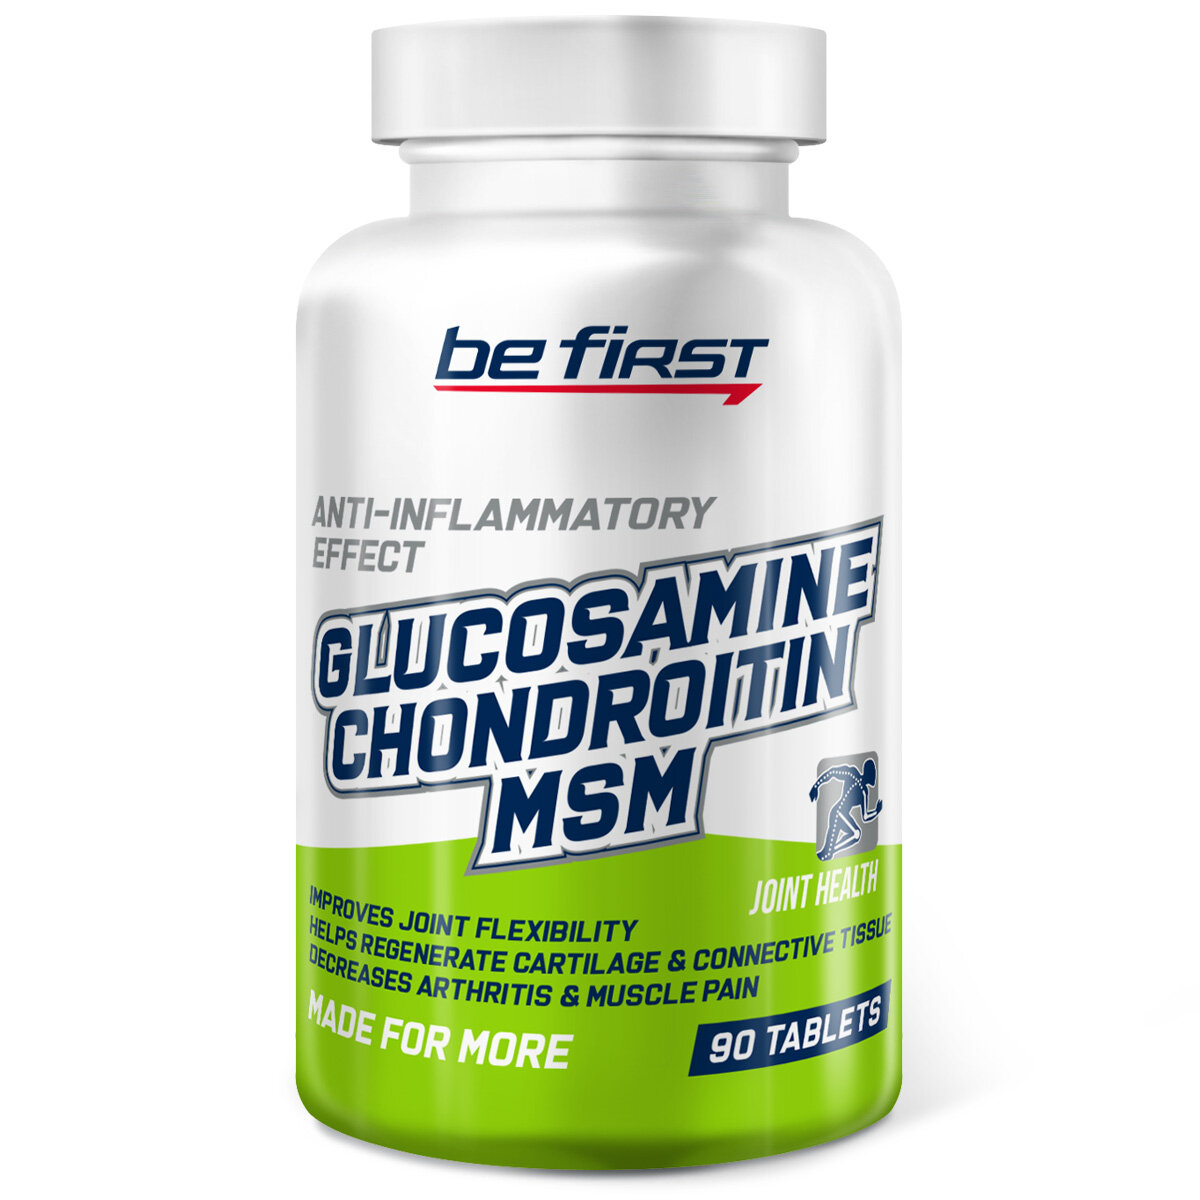 Be First Glucosamine Chondroitin MSM 90  (Be First)